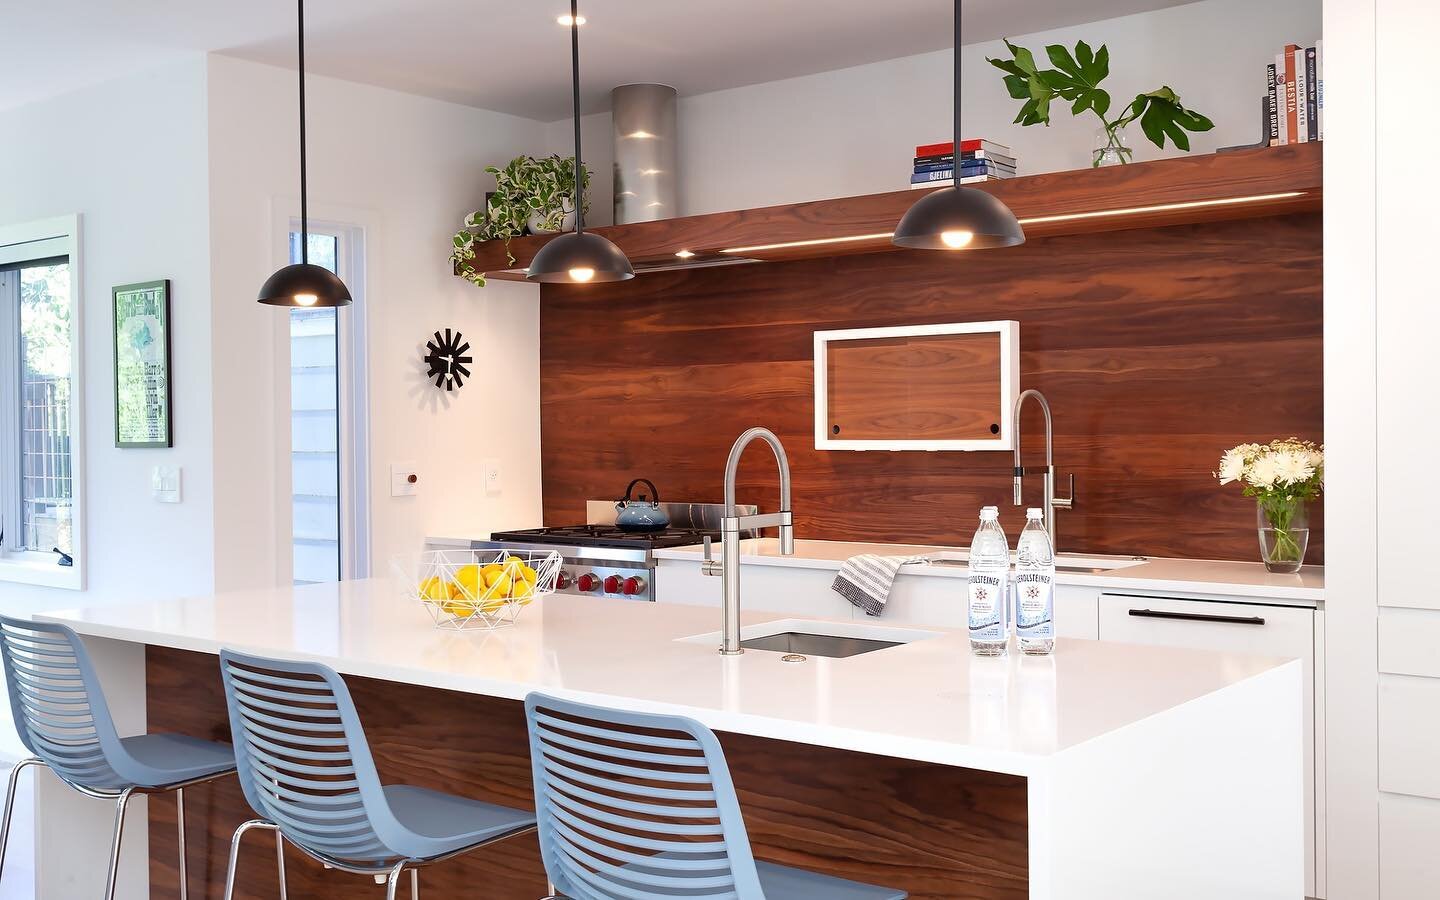 The kitchen is the social hub of this home. Its strong visual connection to the dining room and living room necessitated a design that is both functional and beautiful.
-
Because of the kitchen&rsquo;s close proximity to the living room, we used a 16